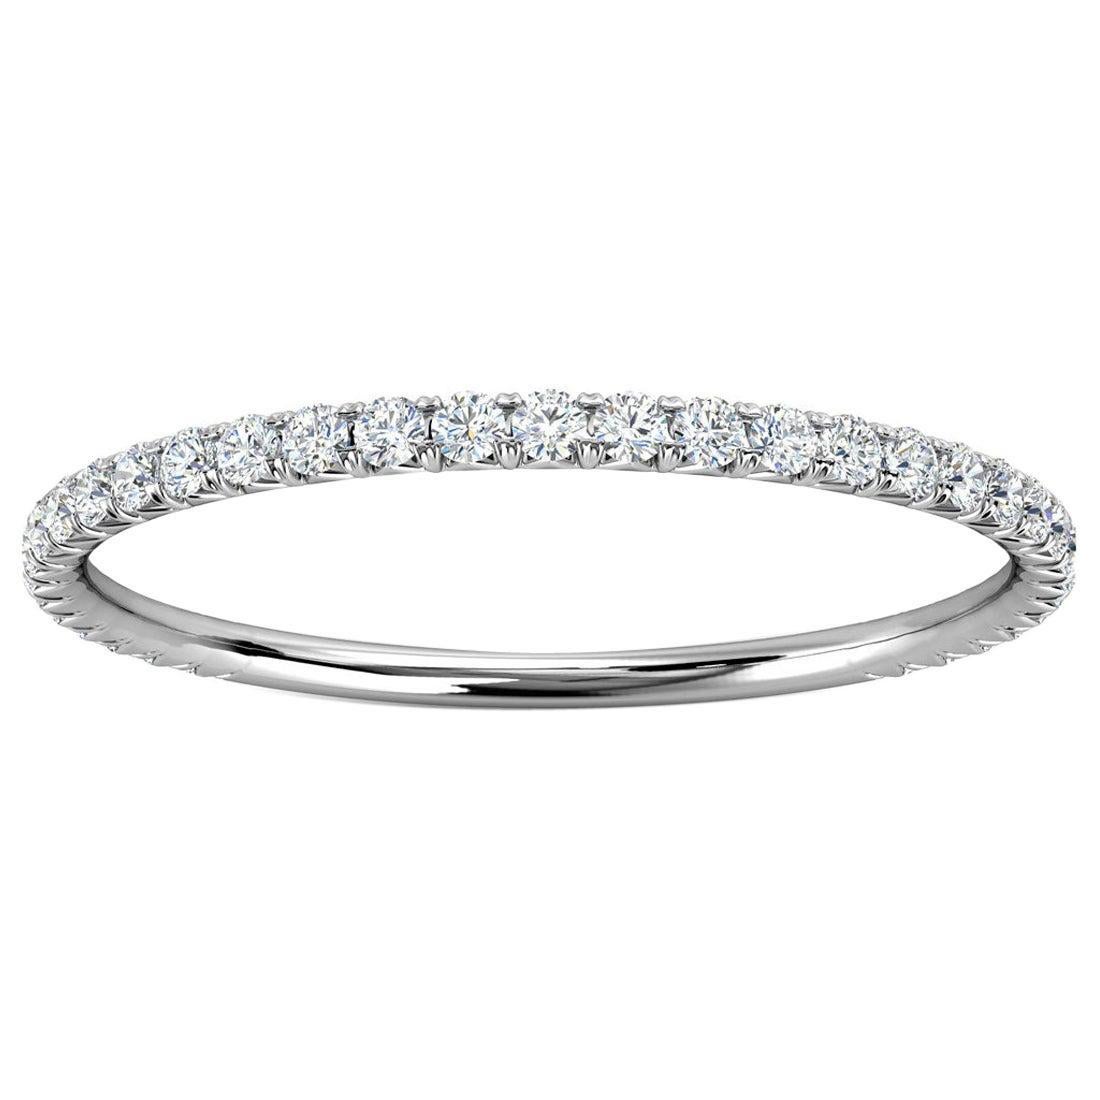 For Sale:  14K White Gold Petite GIA French Pave Diamond Ring '1/5 Ct. tw'